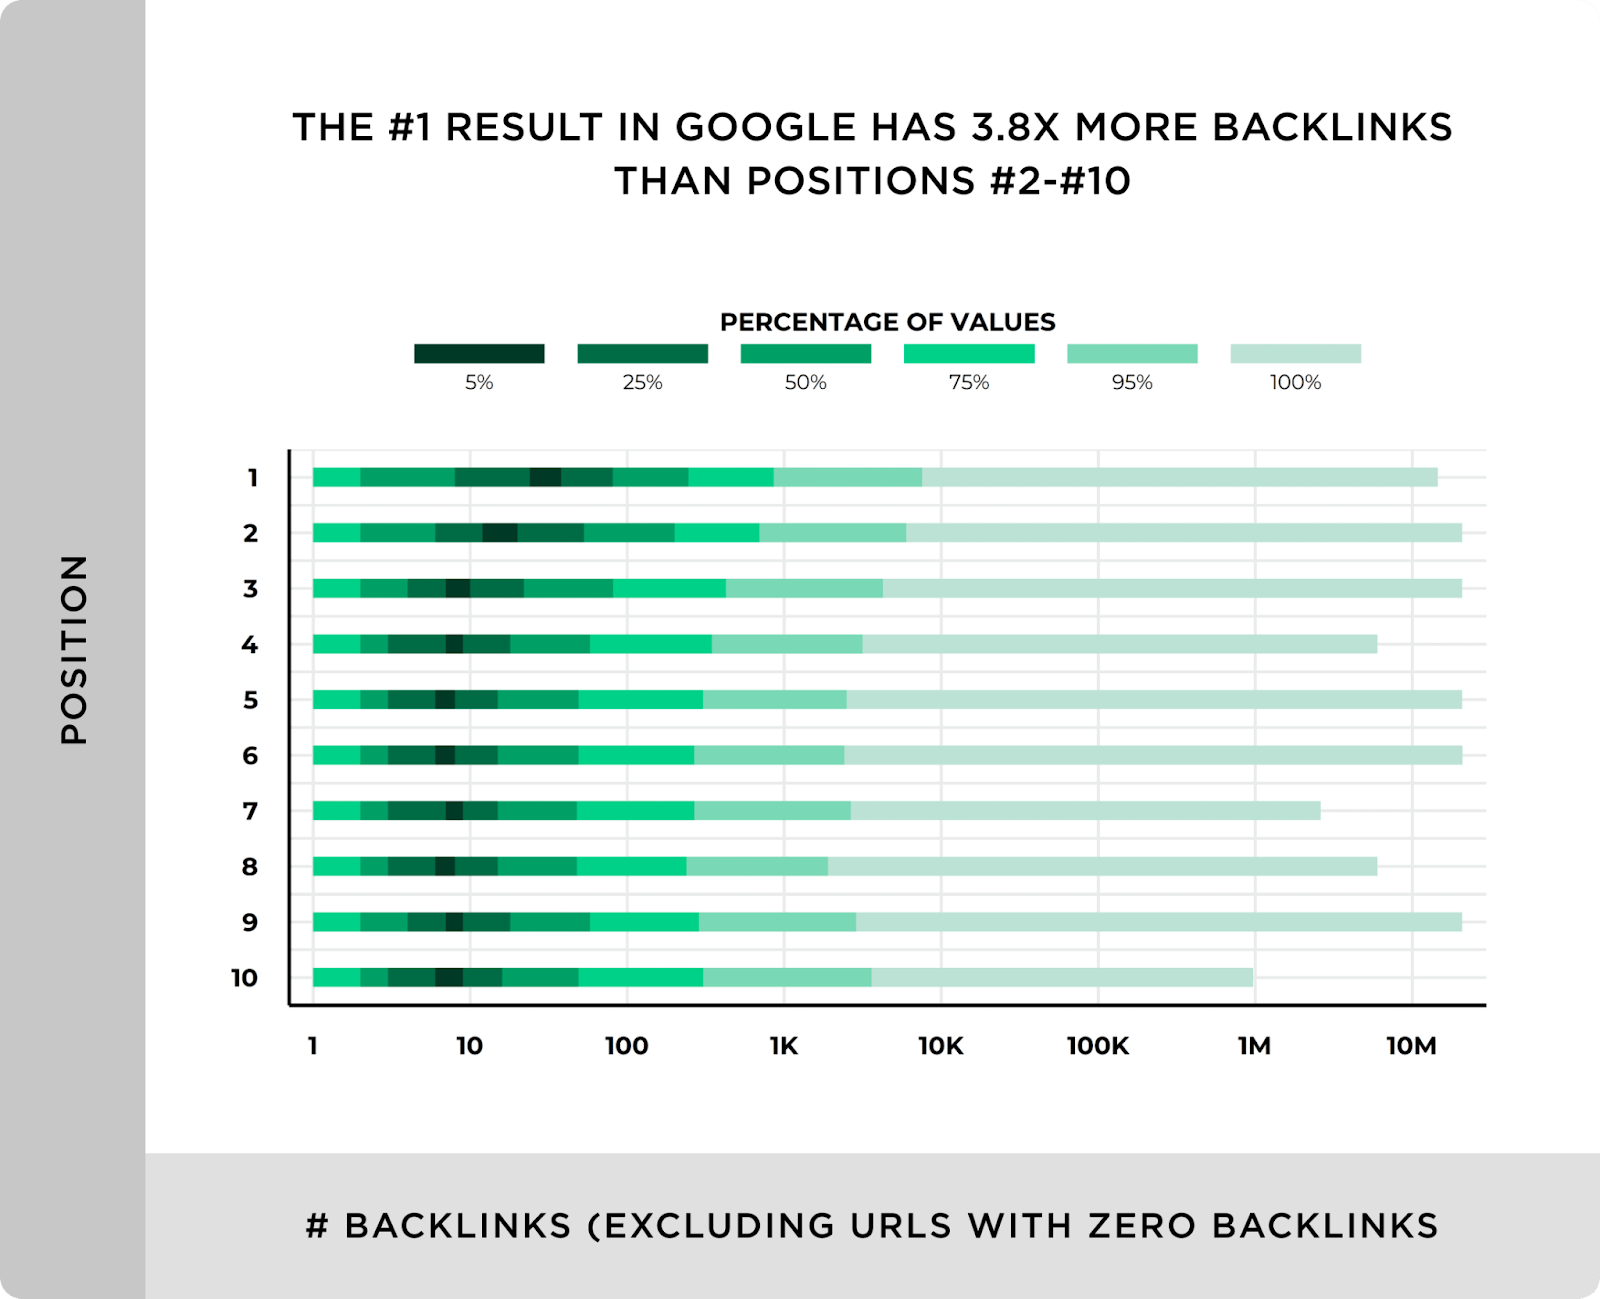 SEO For Content Creators - Top-Ranked Page Has 3.8X More Backlinks